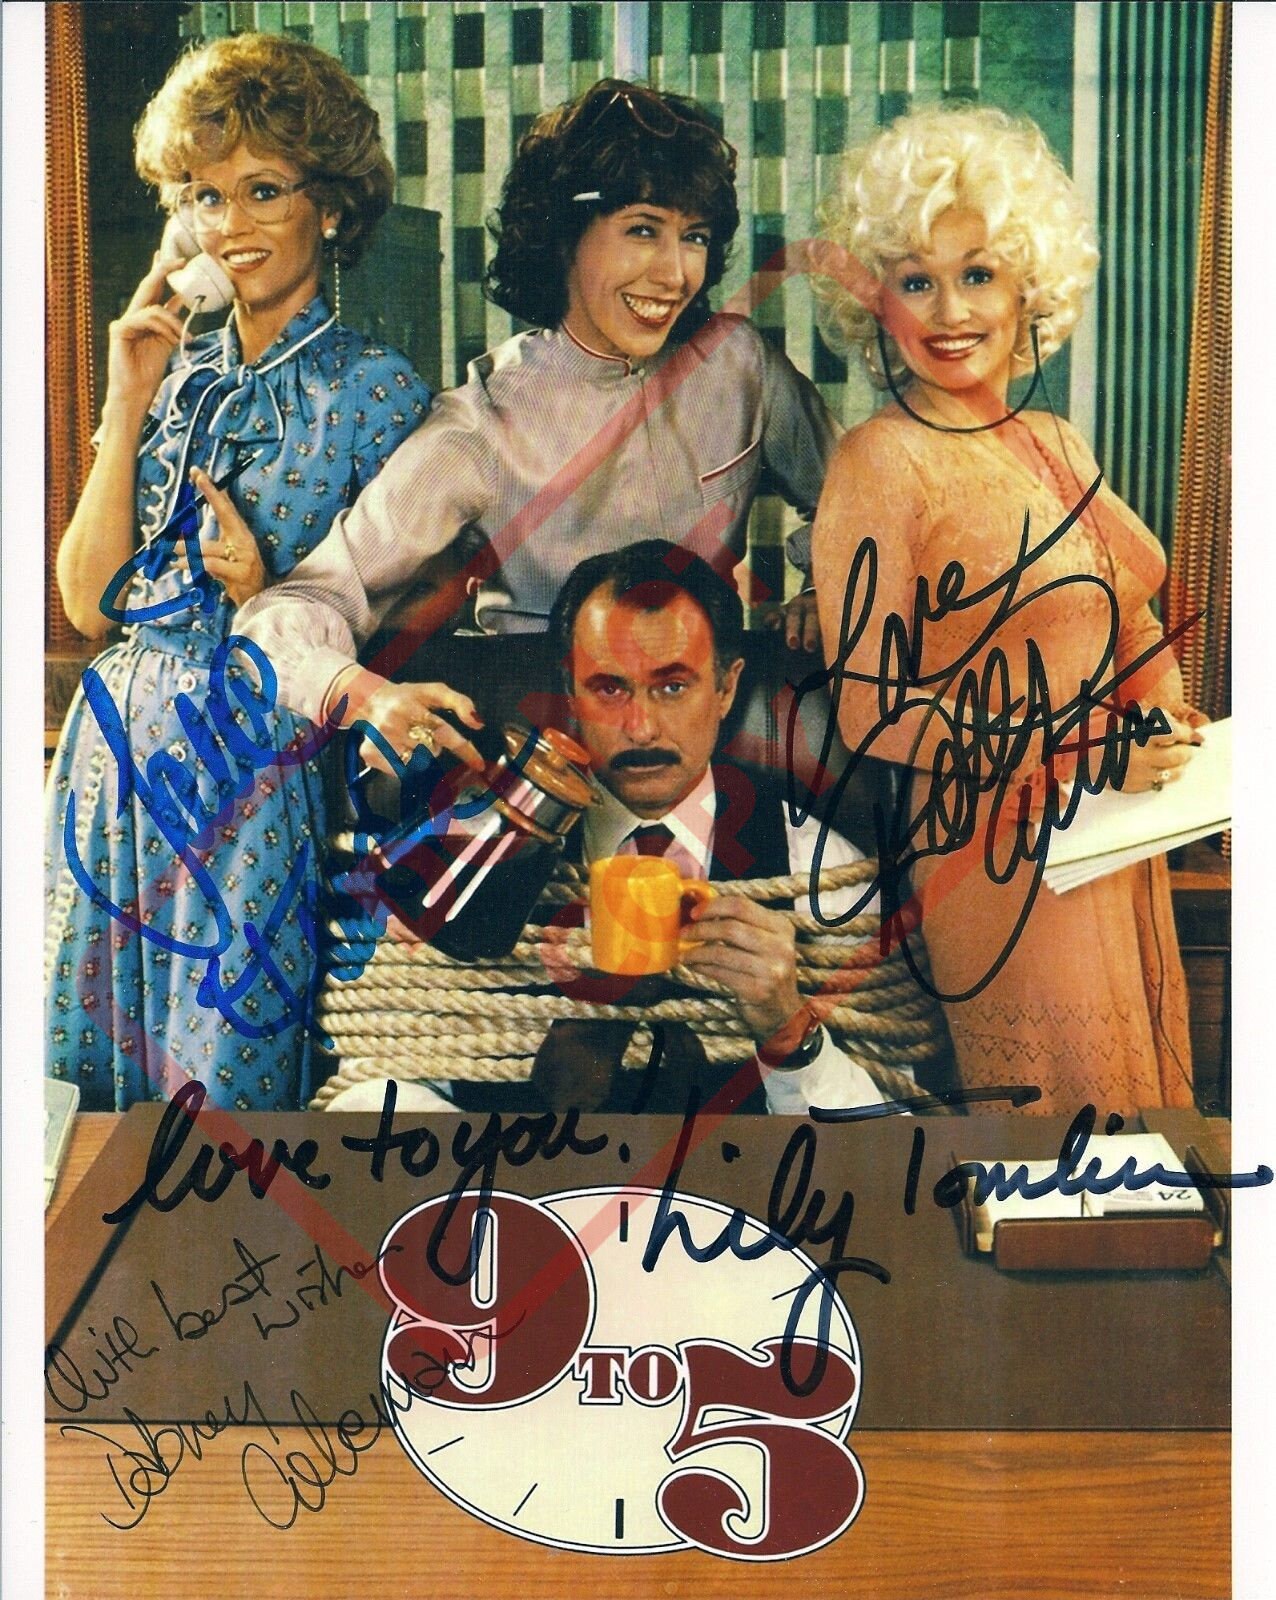 DOLLY PARTON AUTOGRAPHED SIGNED AND FRAMED PP PHOTO POSTER 